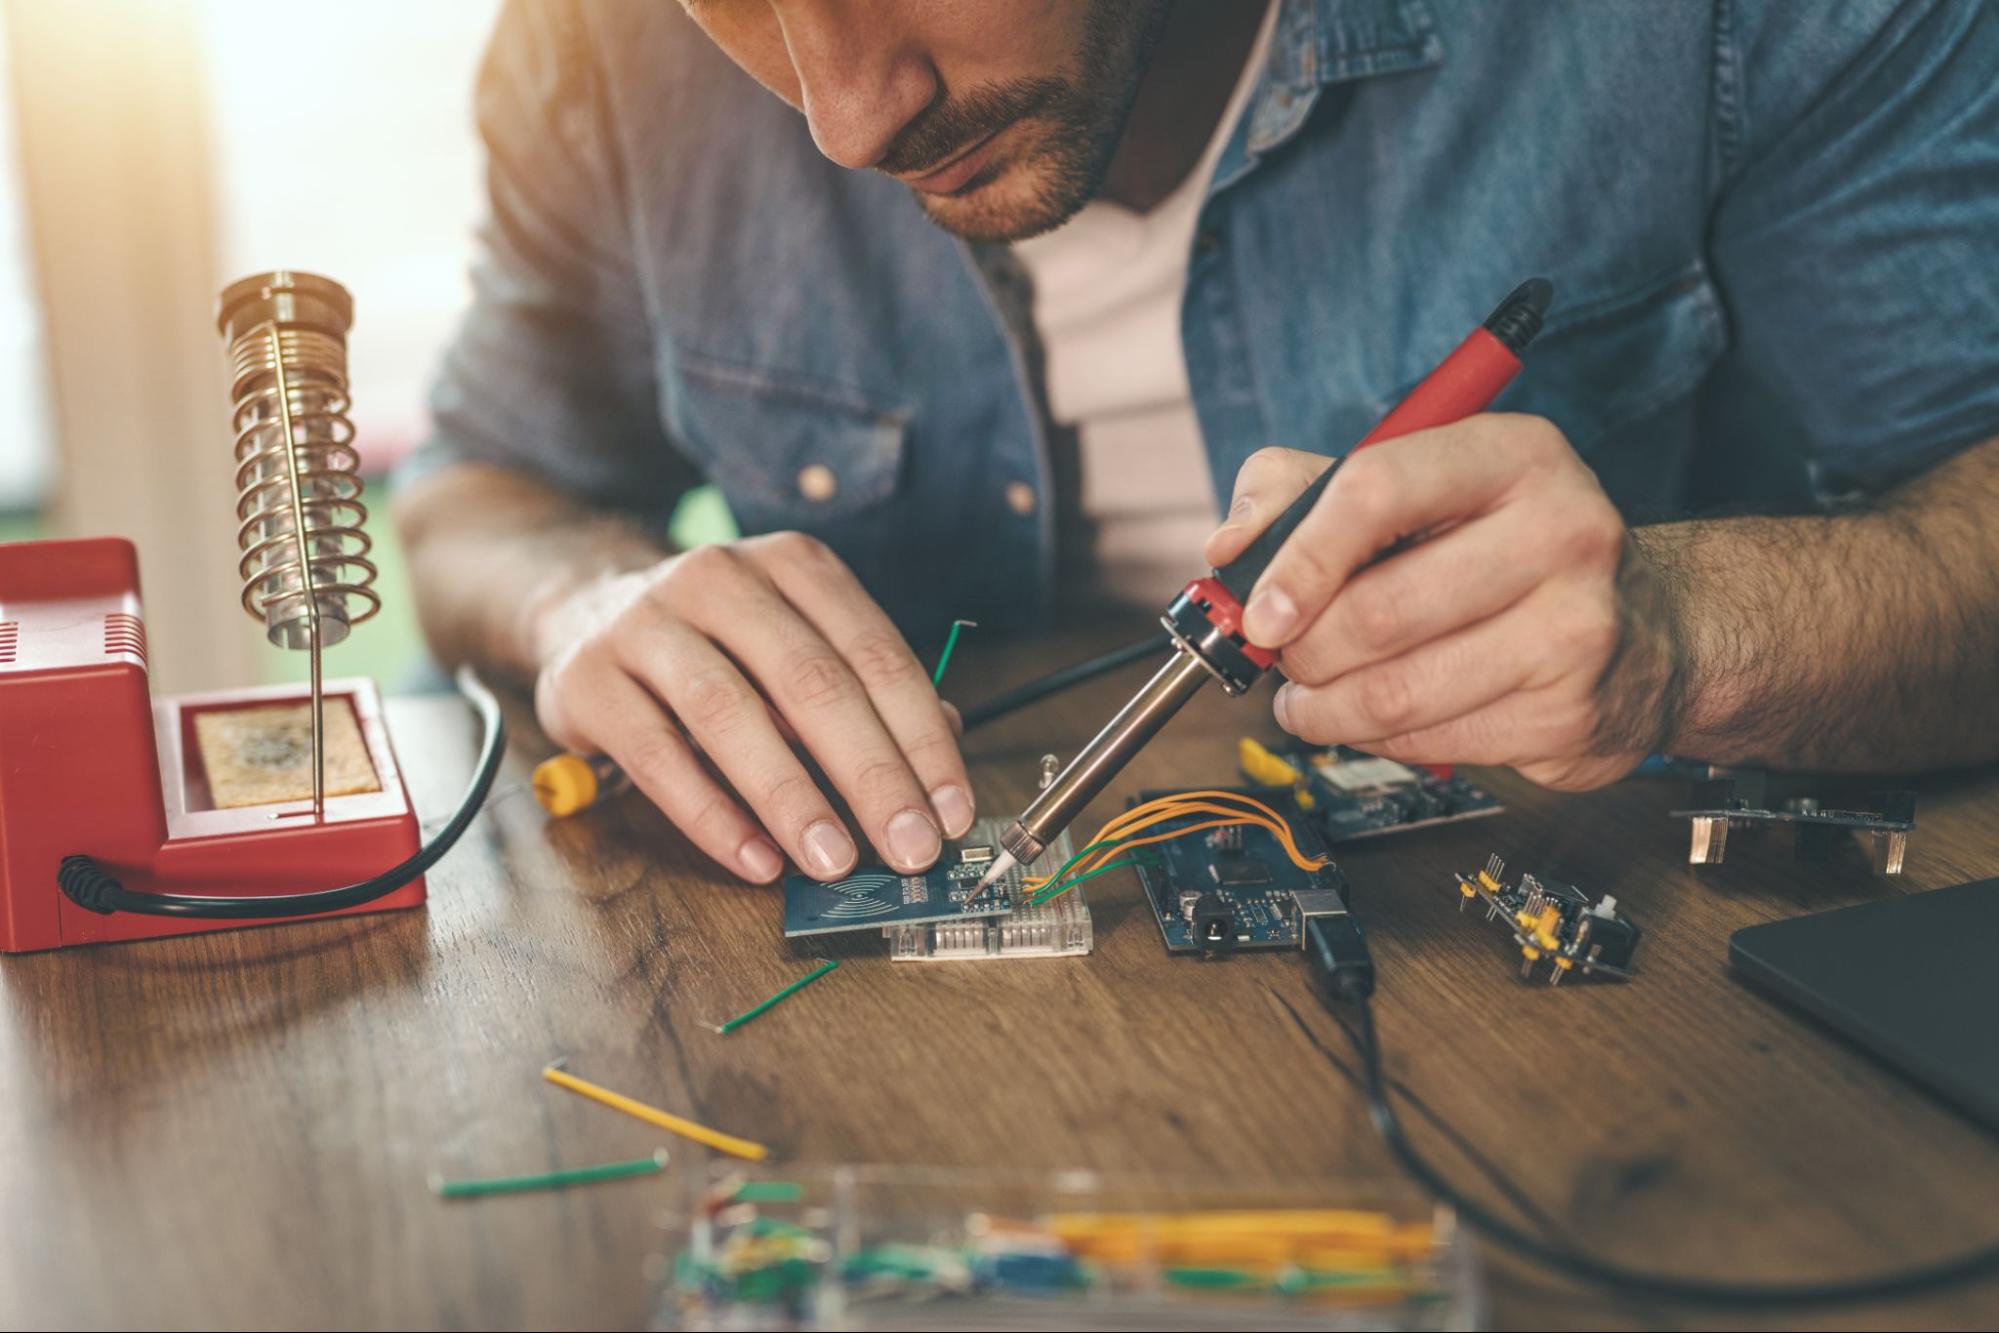 Engineer or technician is focused on repairing electronic circuit board with soldering iron.